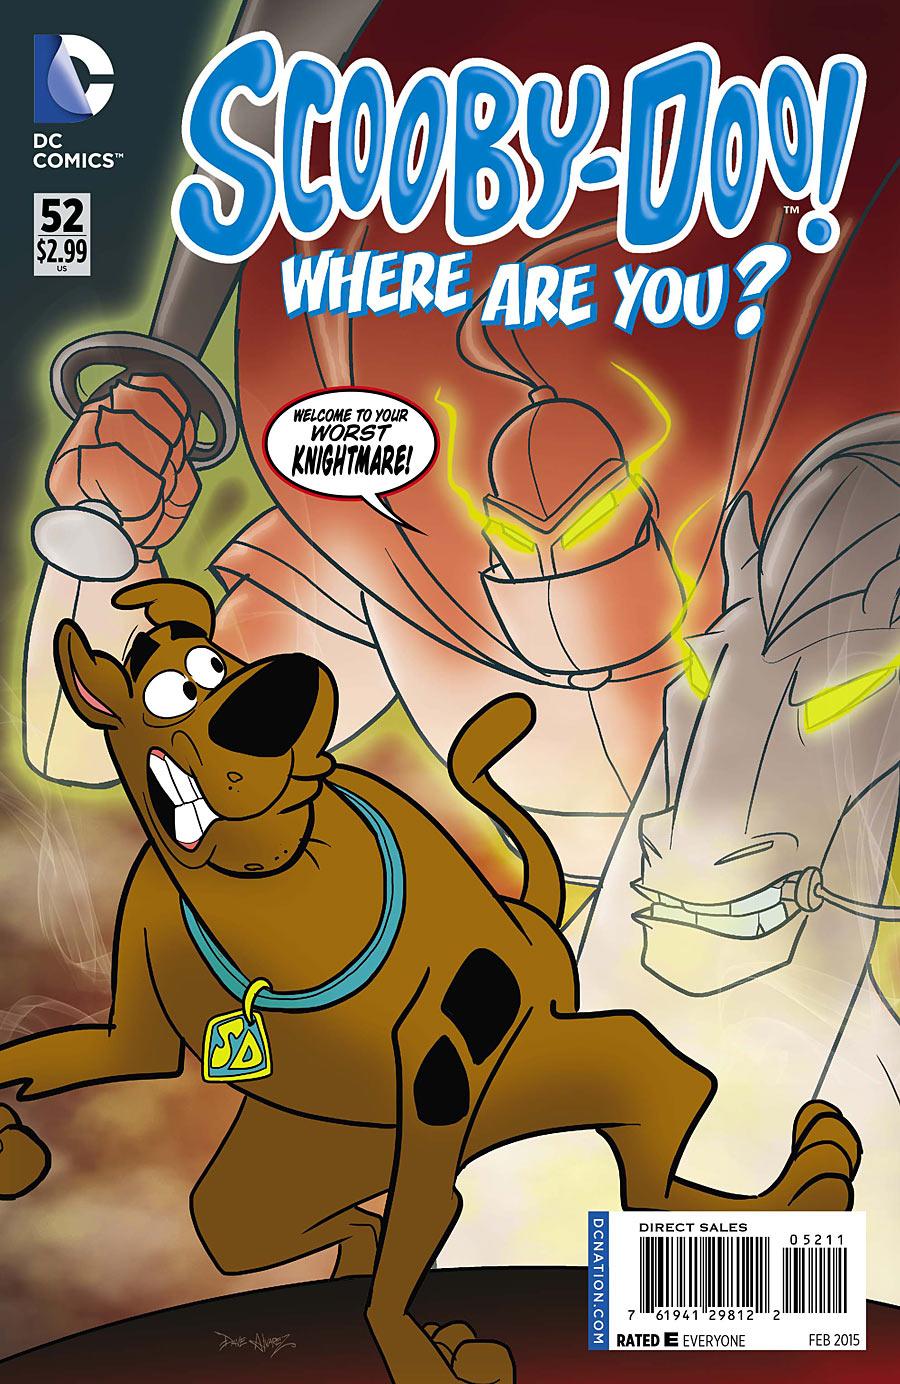 Scooby-Doo: Where Are You? Vol. 1 #52